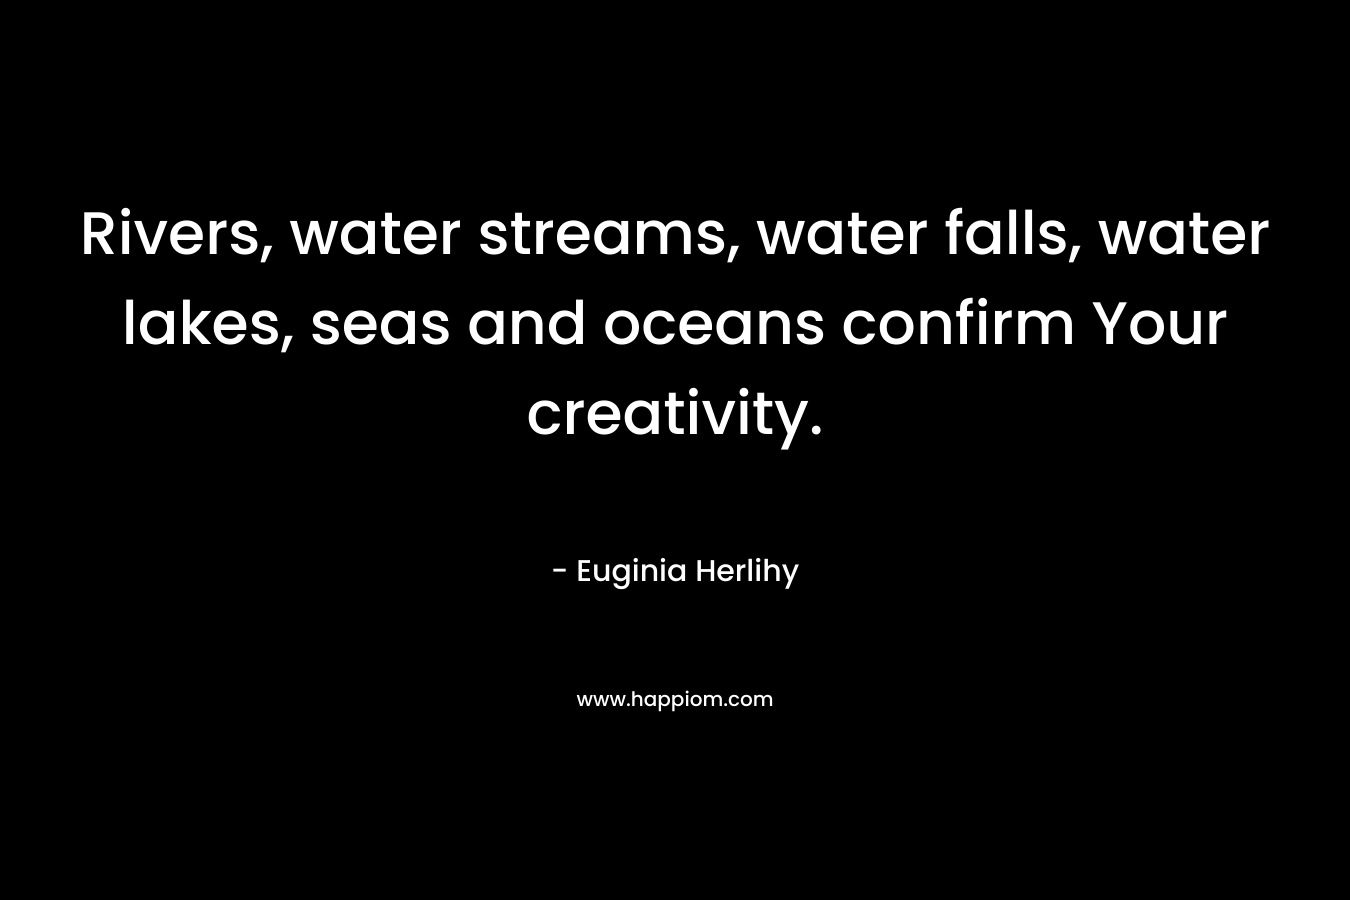 Rivers, water streams, water falls, water lakes, seas and oceans confirm Your creativity.